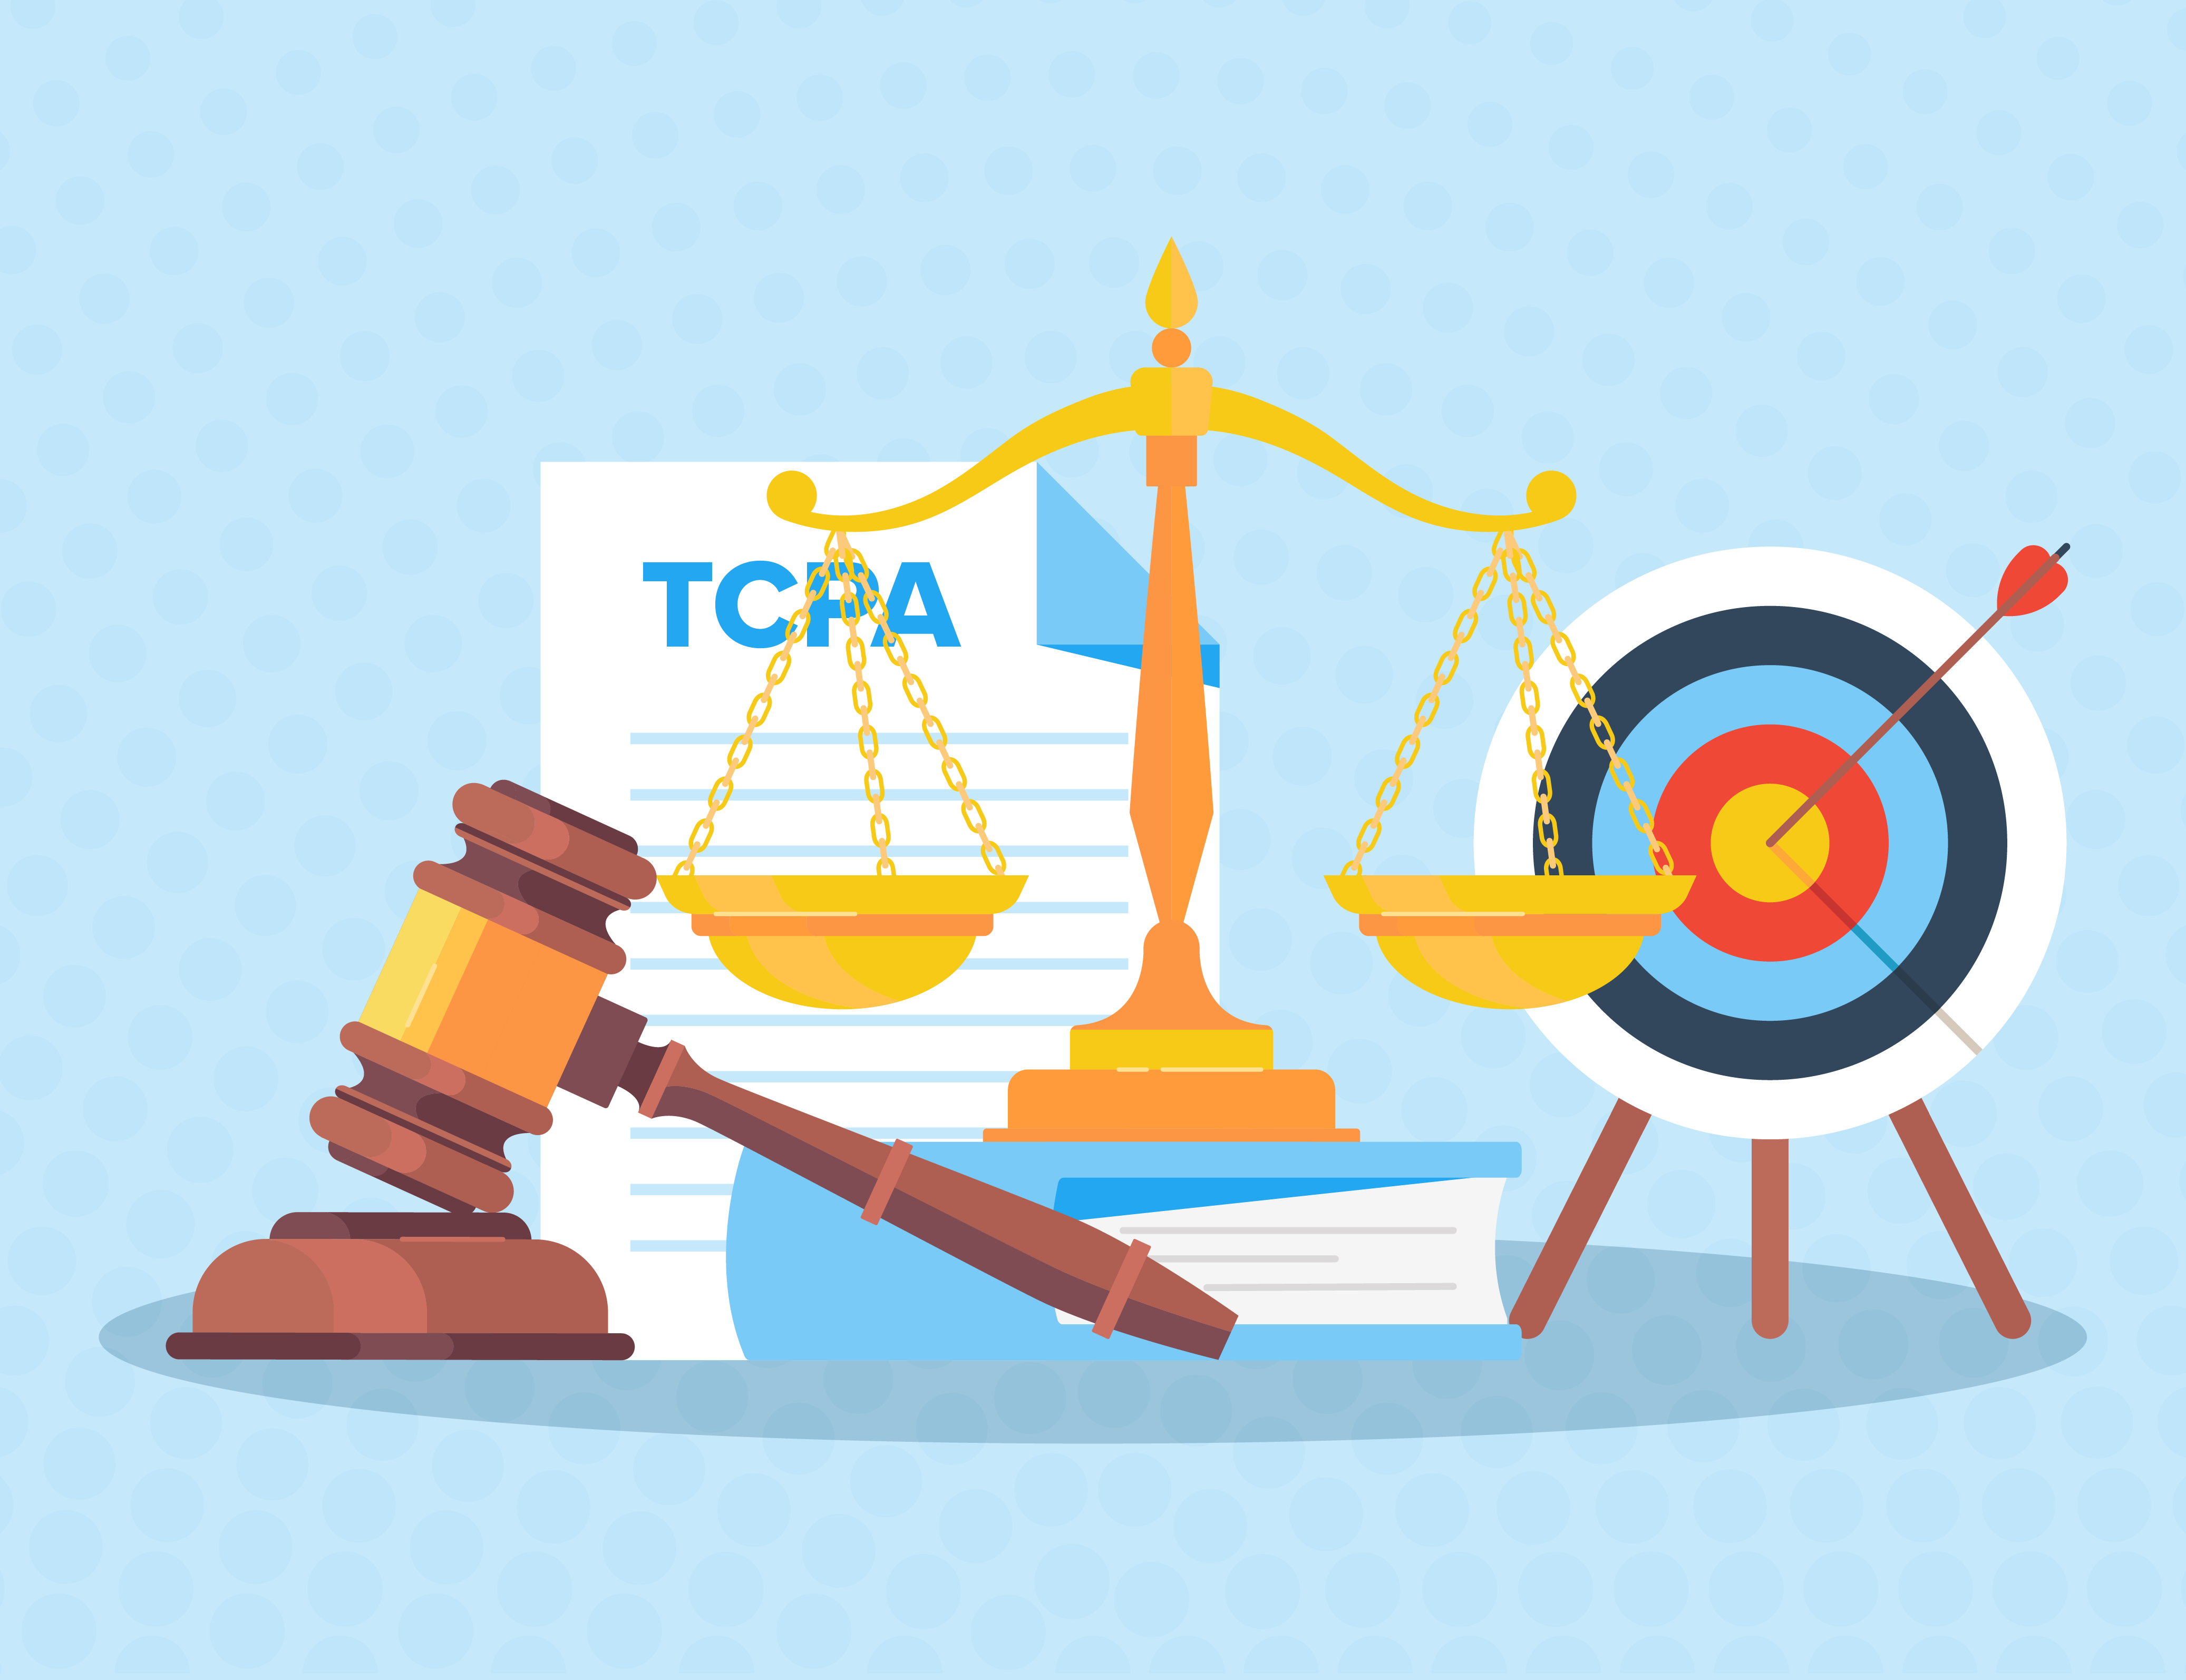 TCPA rules What is changing and how to adapt to new regulations